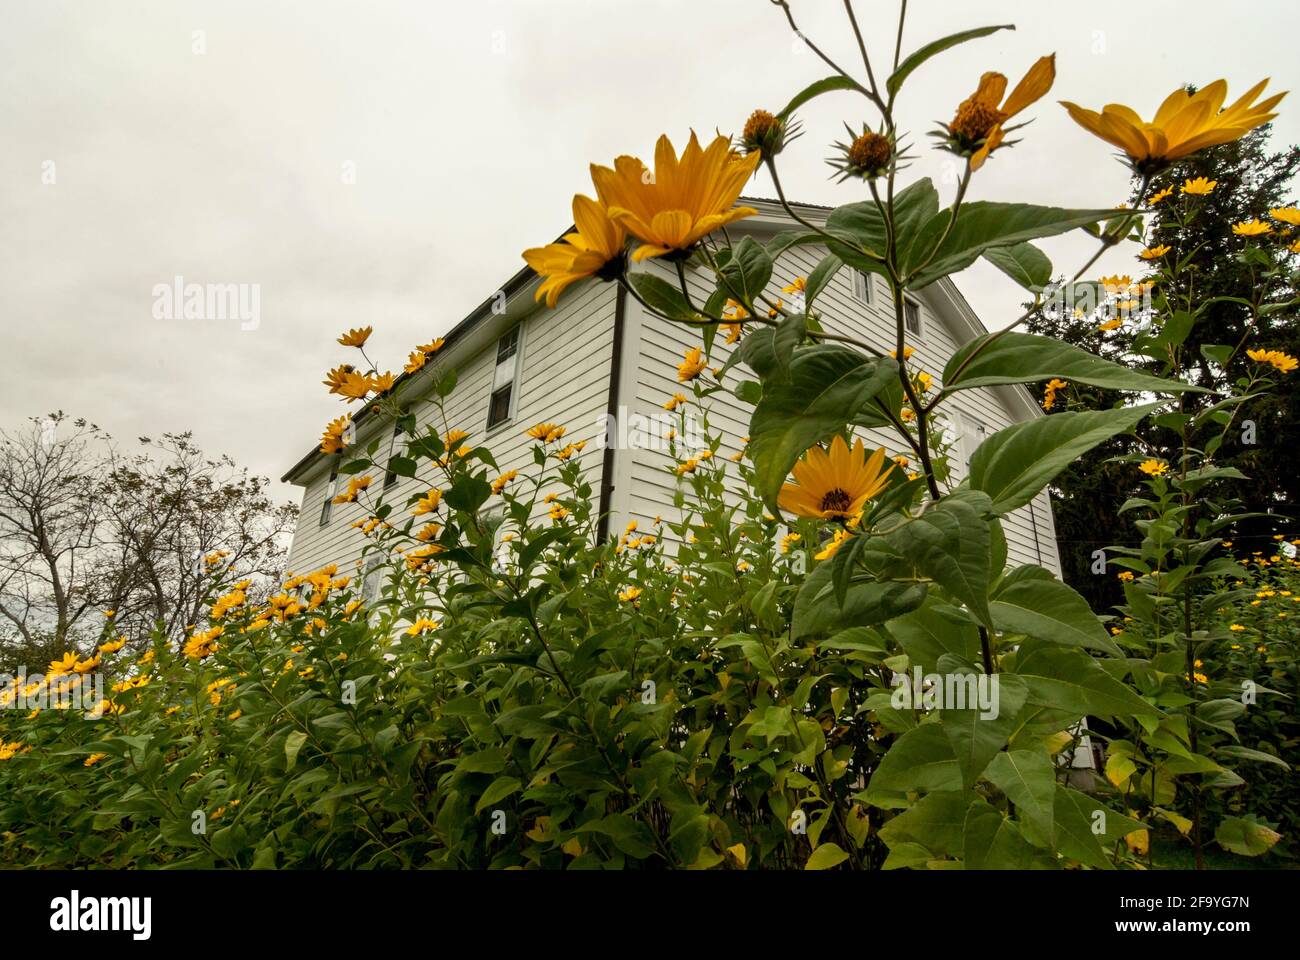 A white, clapperboard Shaker house in the Canterbury Shaker Village, New Hampshire, USA, seen through tall sunflowers. Stock Photo